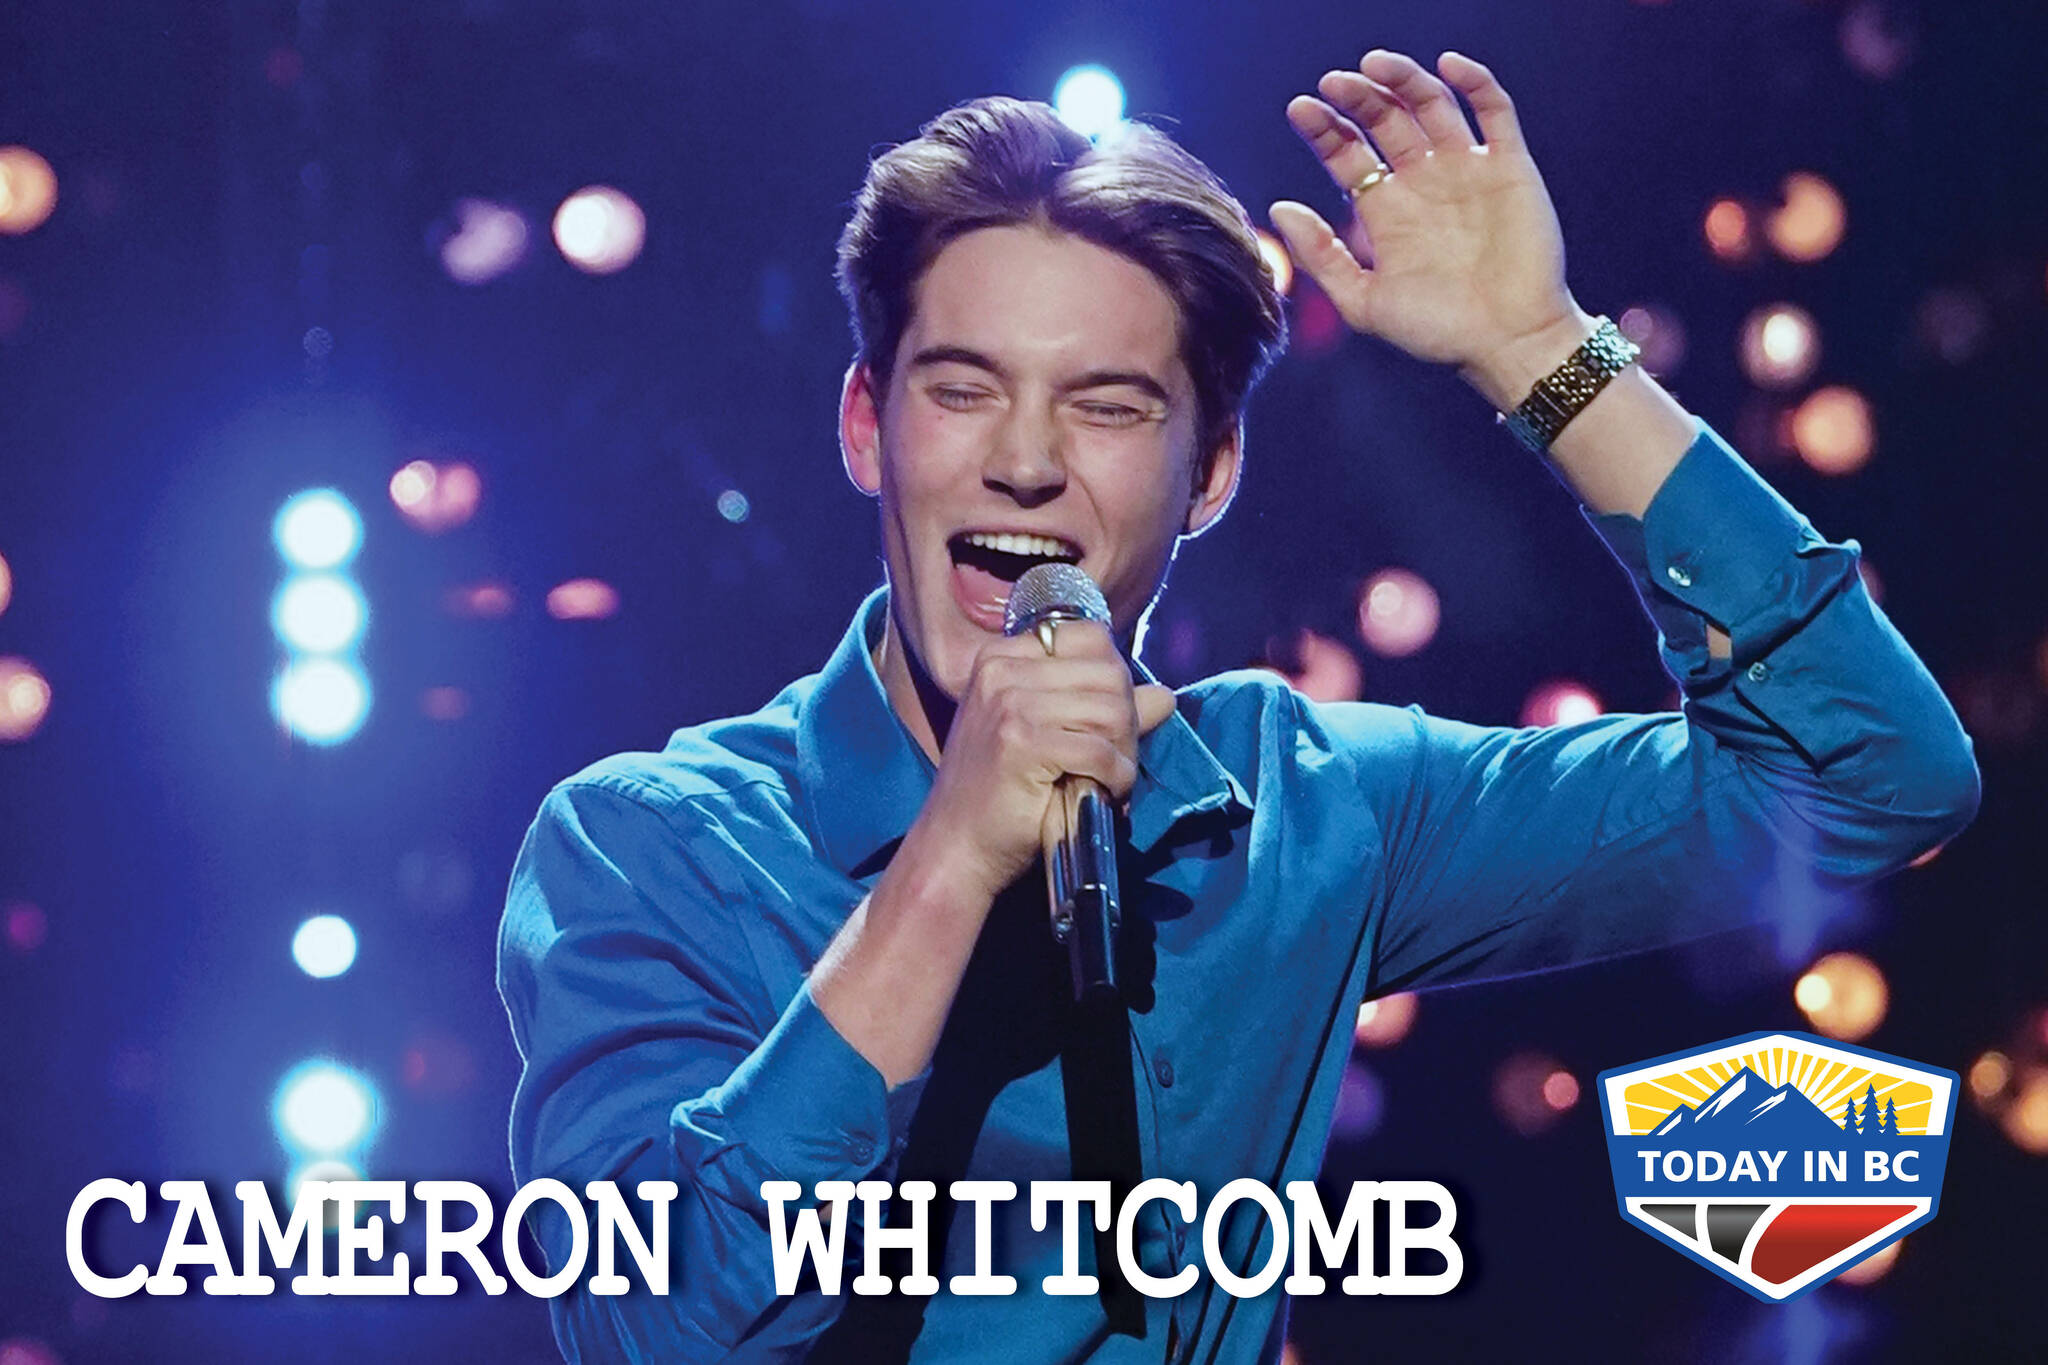 'American Idol' contestant Cameron Whitcomb. (Submitted photo)